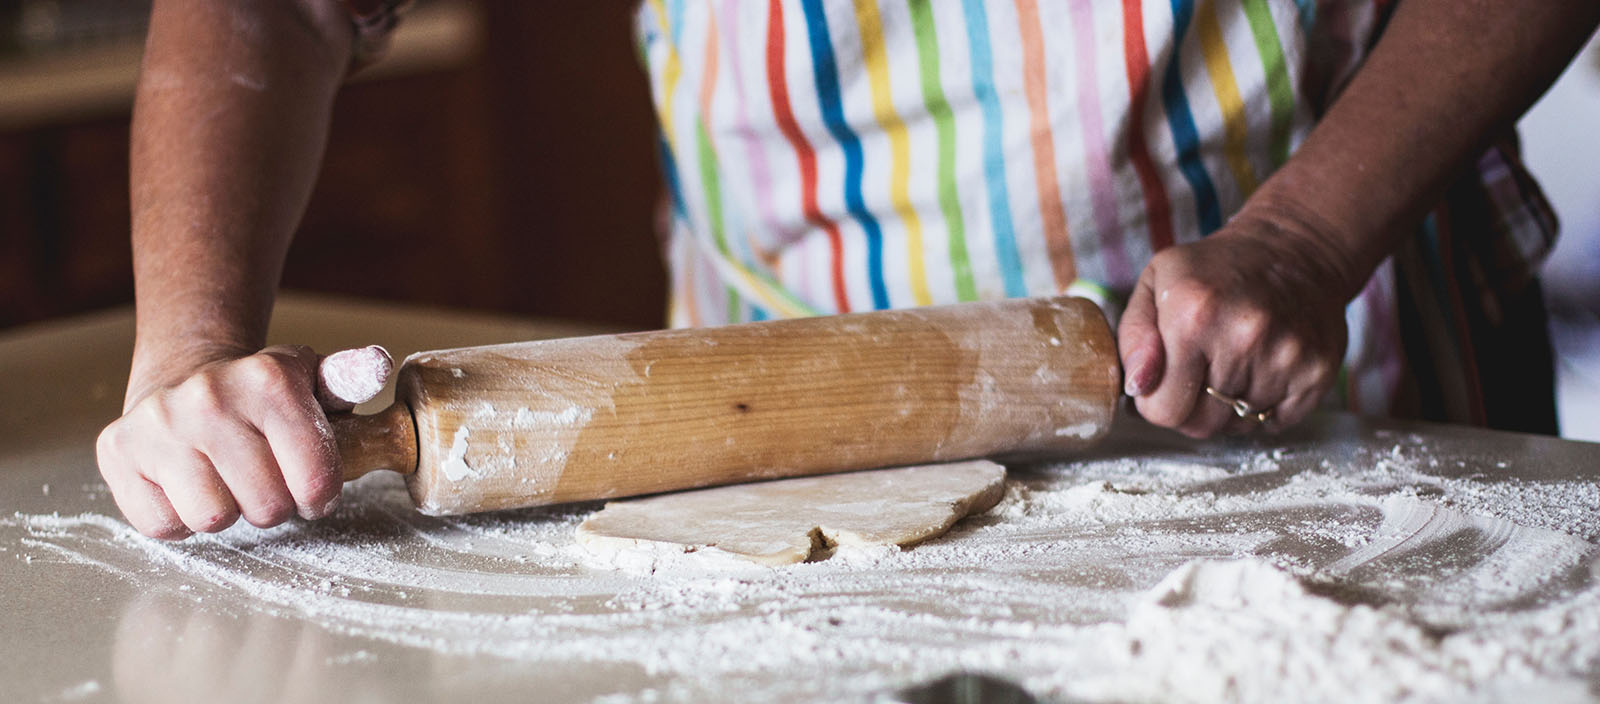 Person using a rolling pin on dough